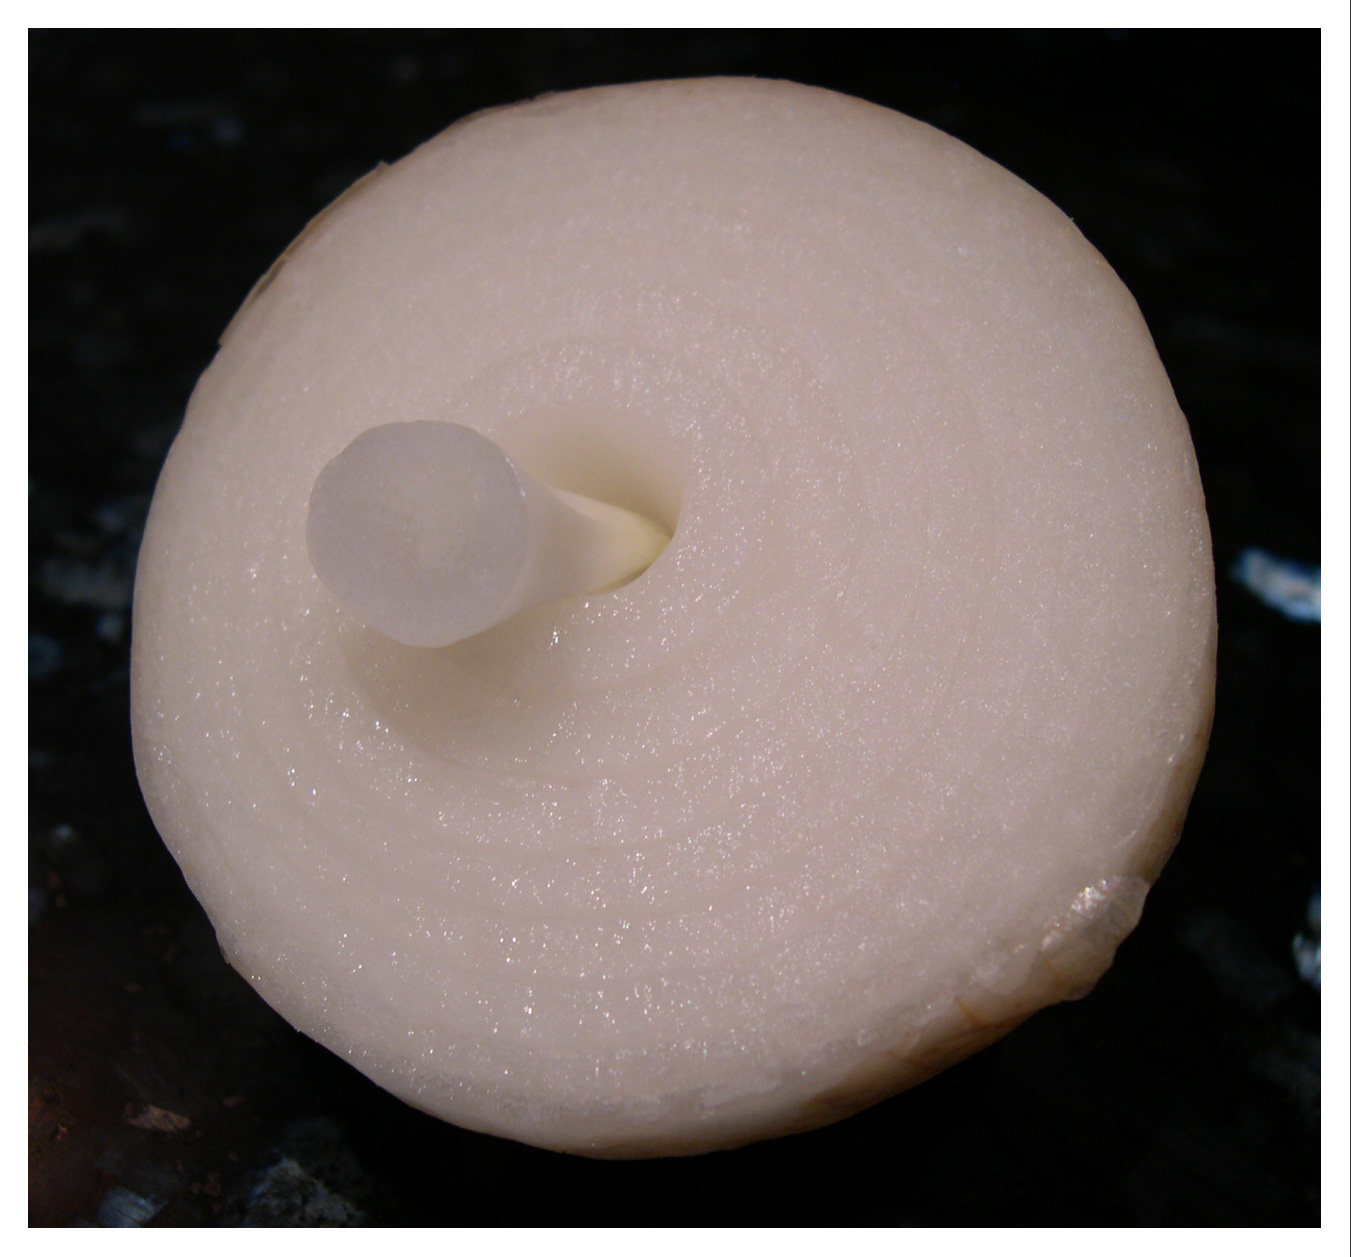 a white apple on a black table with a white object sticking out of it